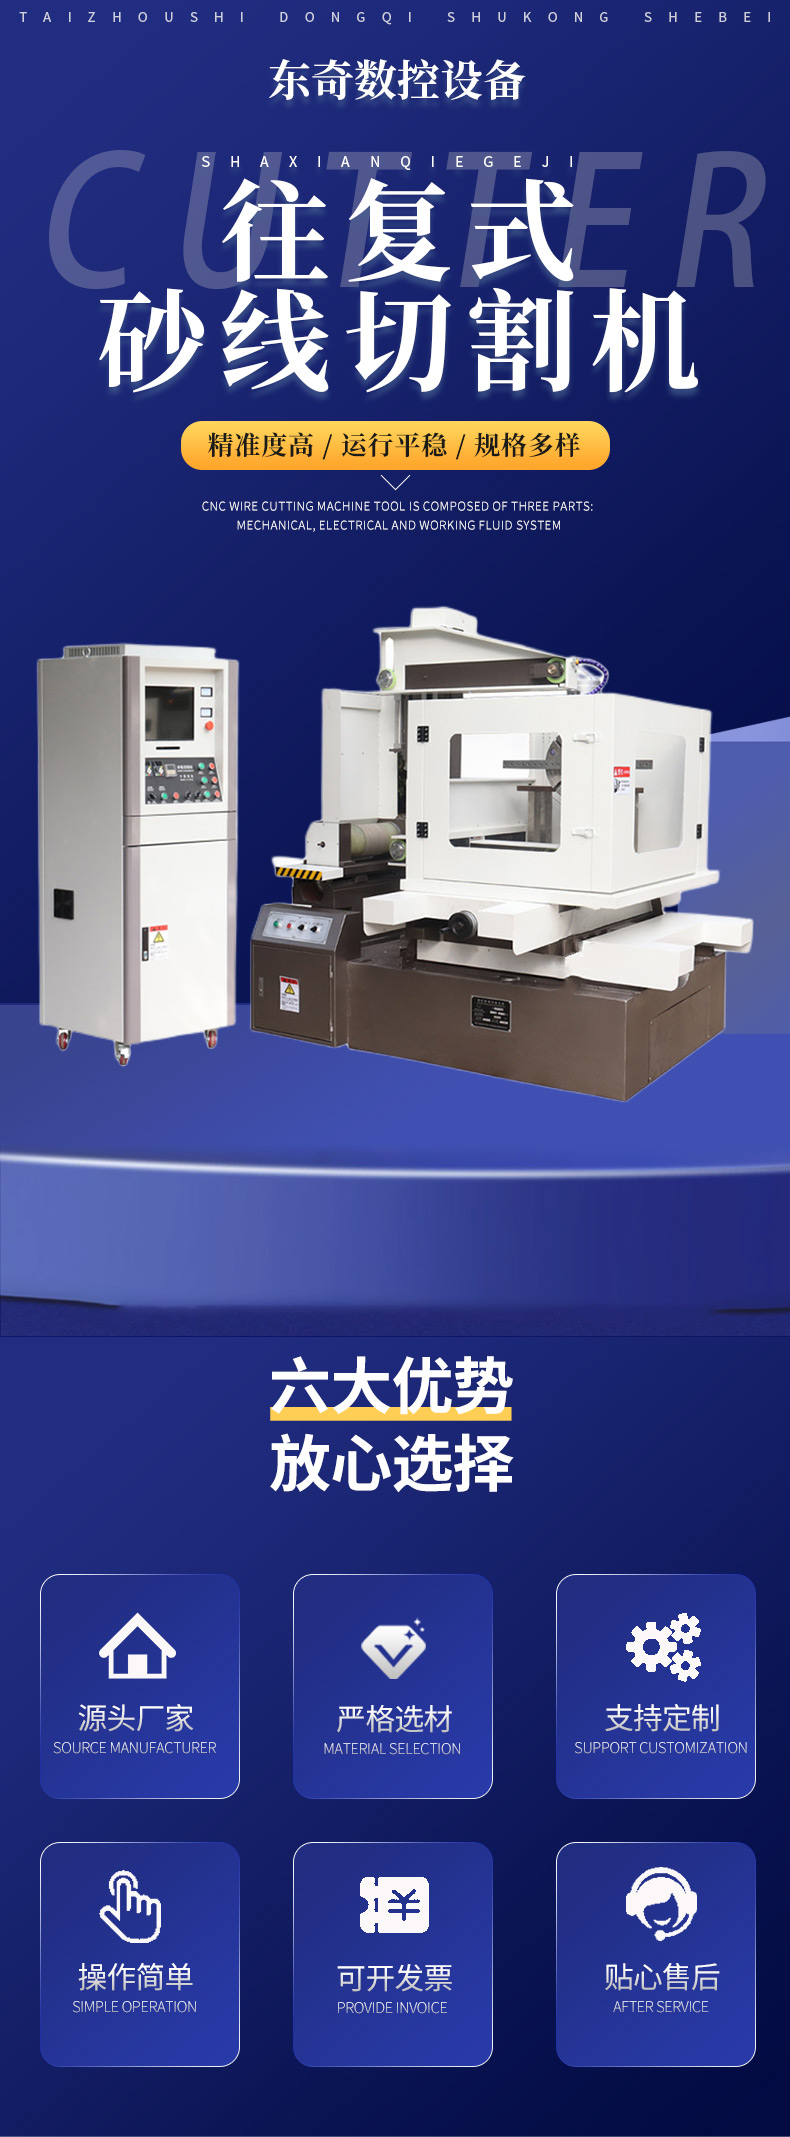 Reciprocating sand wire cutting machine, diamond wire cutting machine, graphite, ceramic, glass and other materials cutting